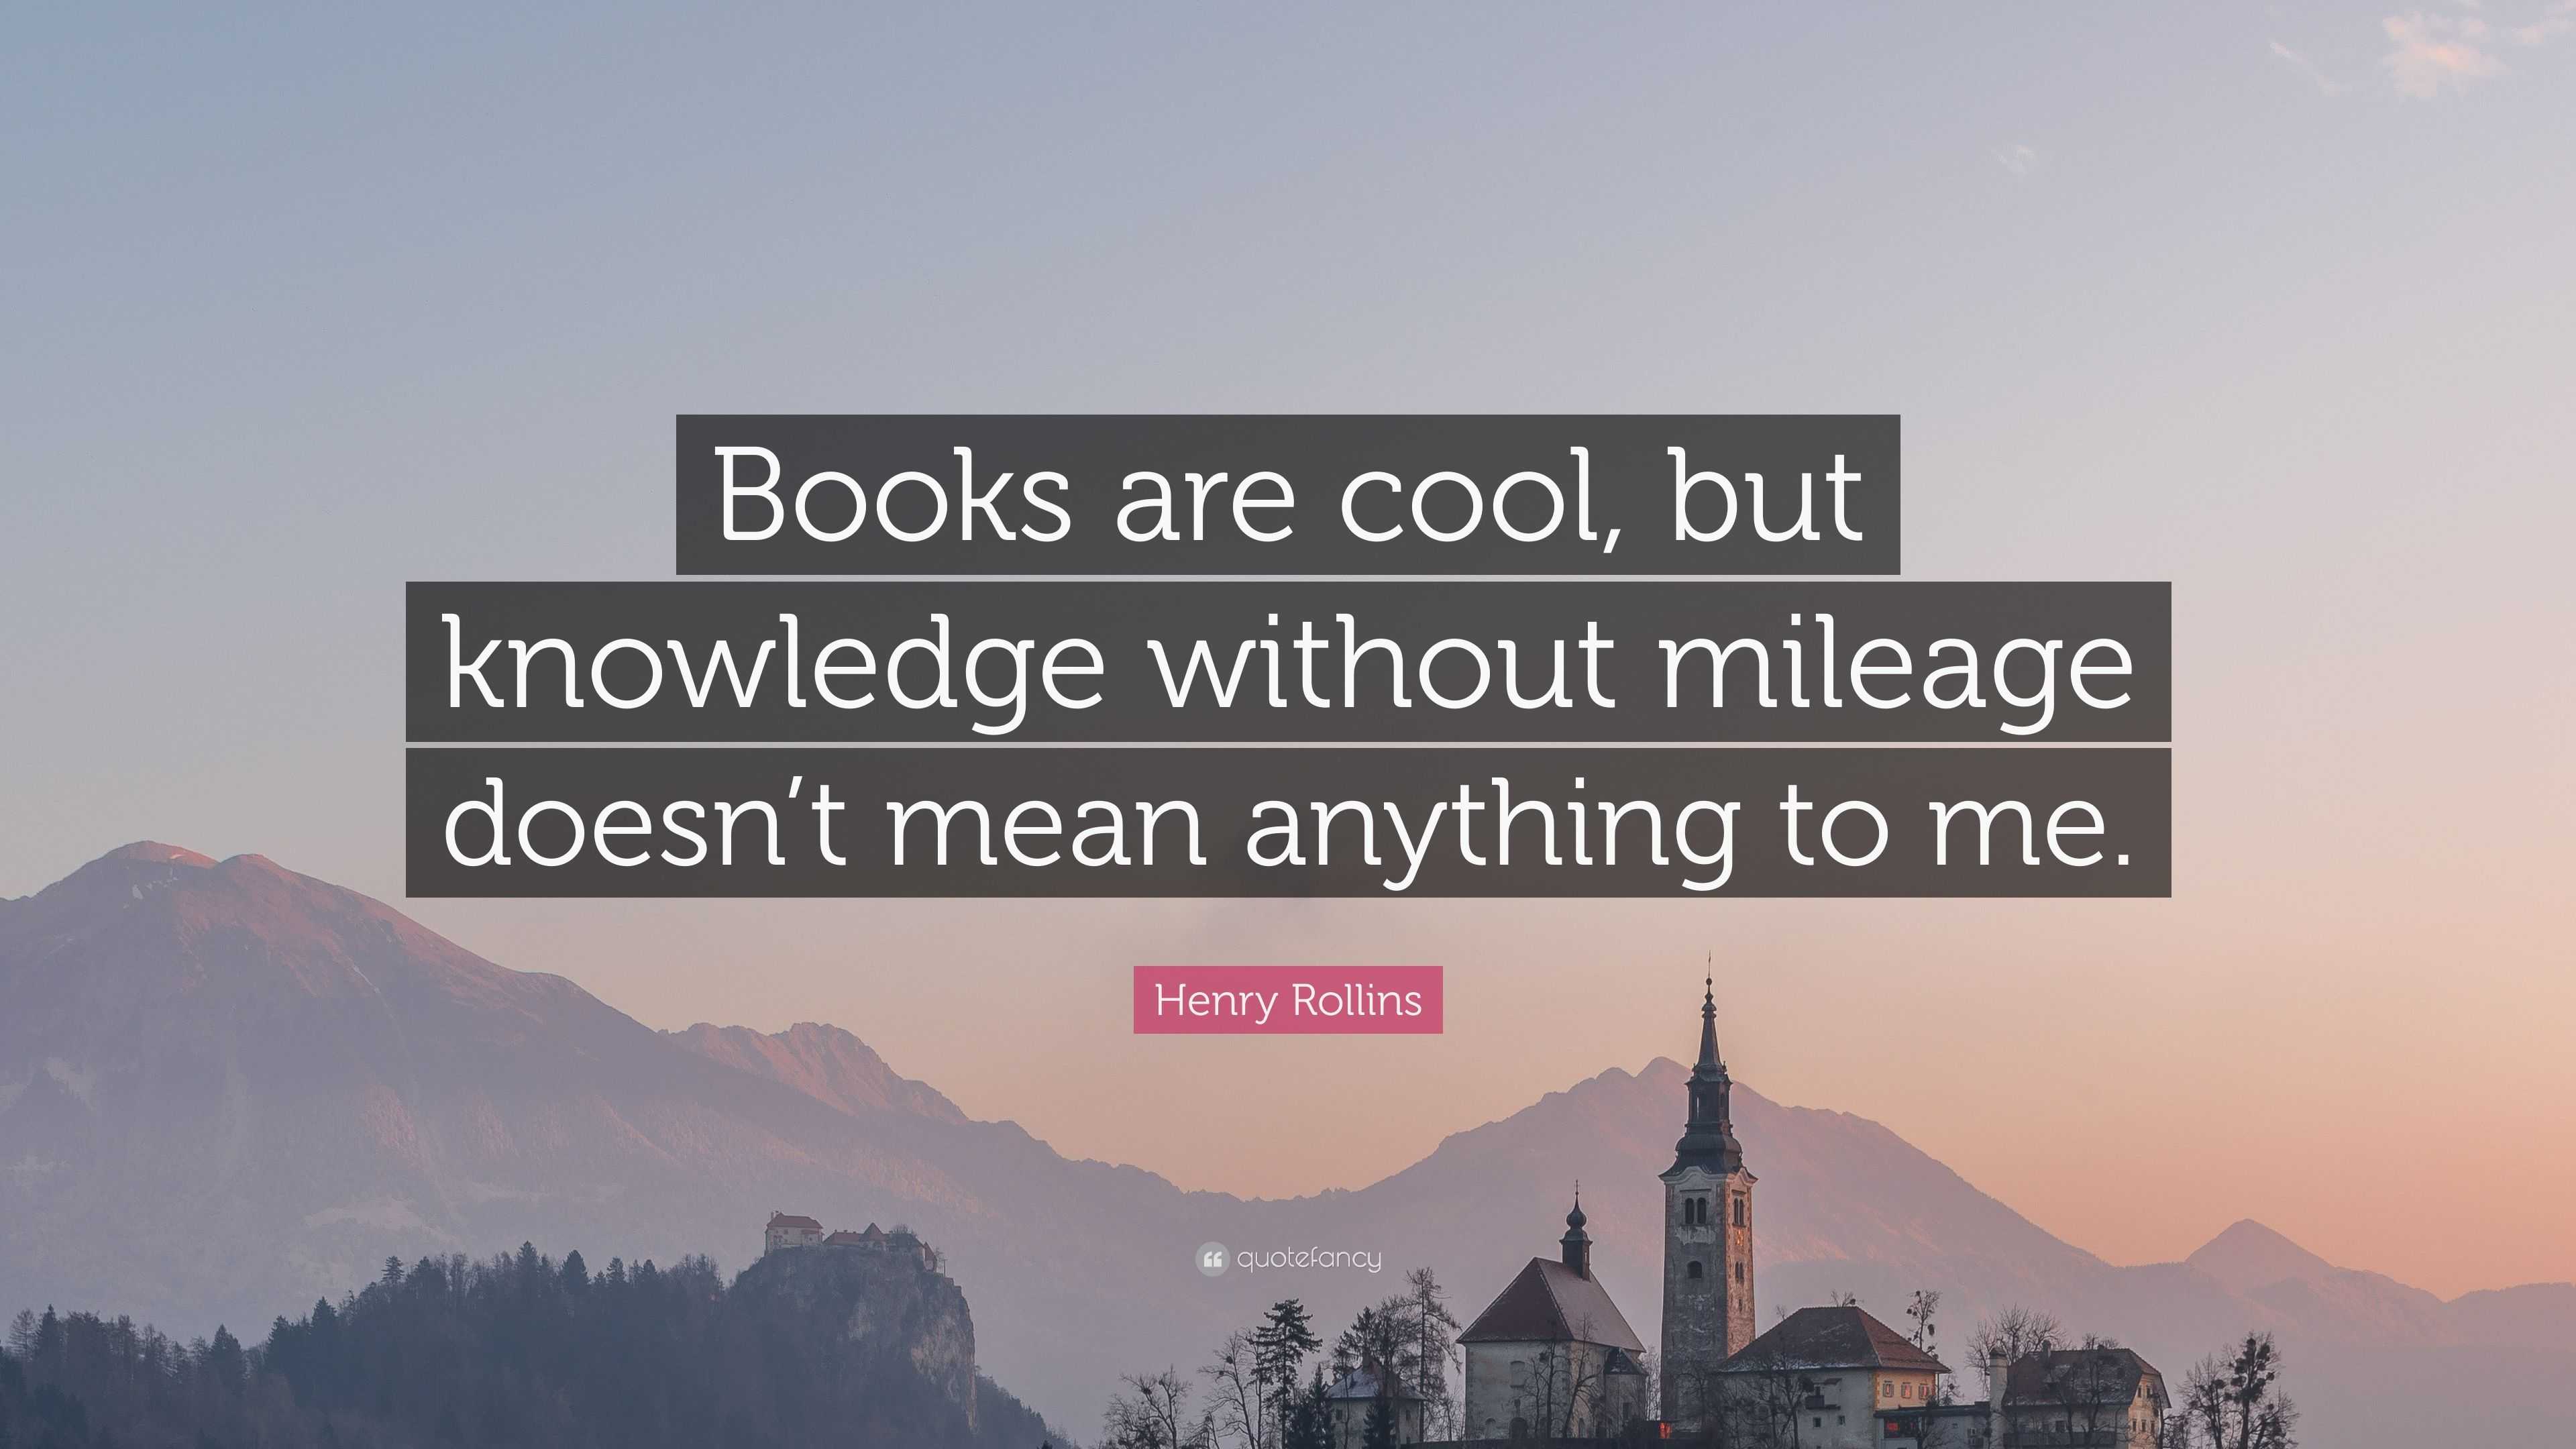 Henry Rollins Quote: “Books are cool, but knowledge without mileage ...